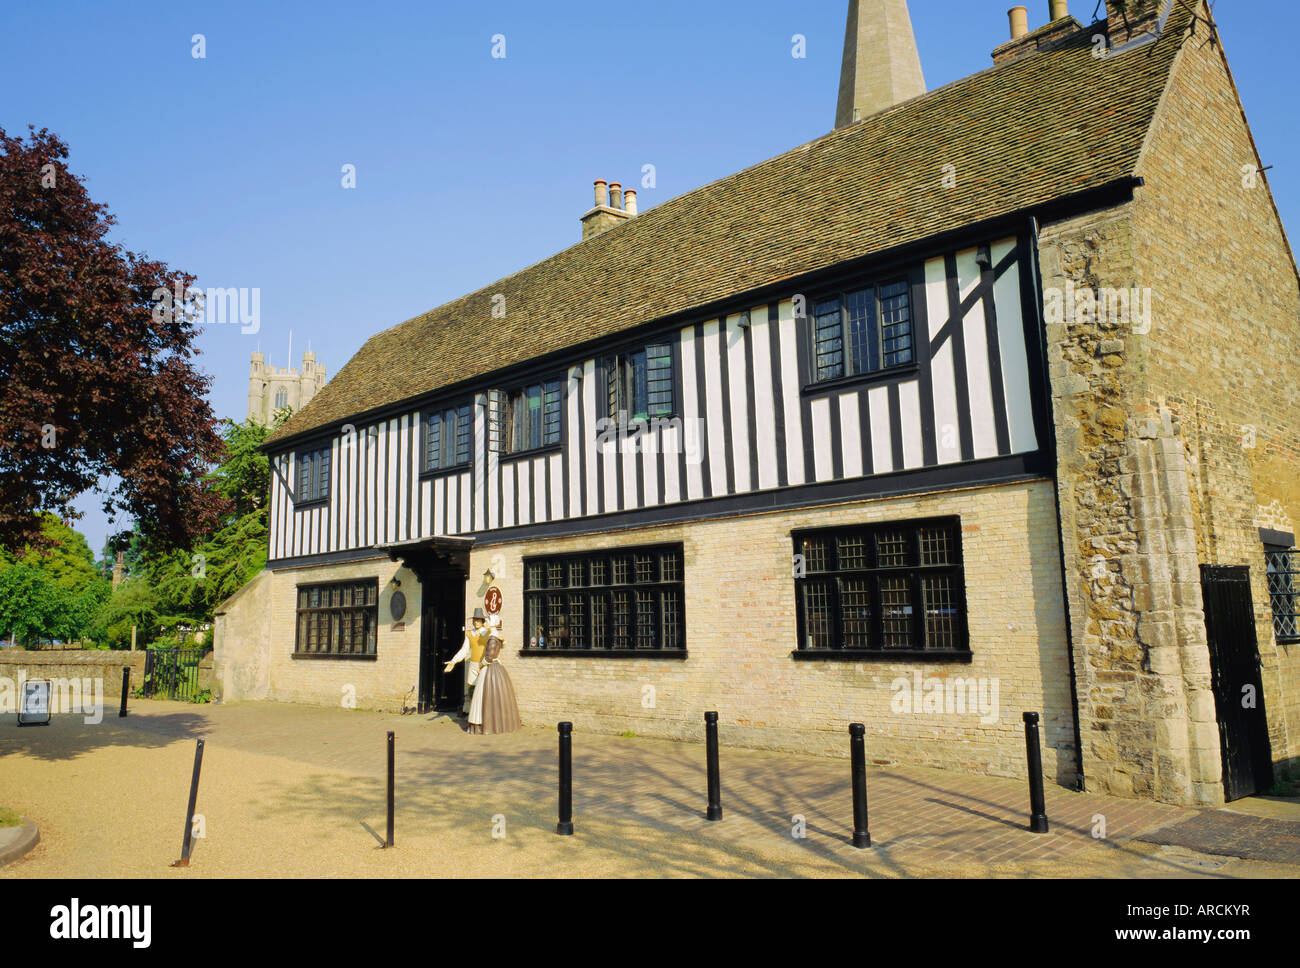 Maison d'Oliver Cromwell, Ely, Cambridgeshire, Angleterre, RU Banque D'Images